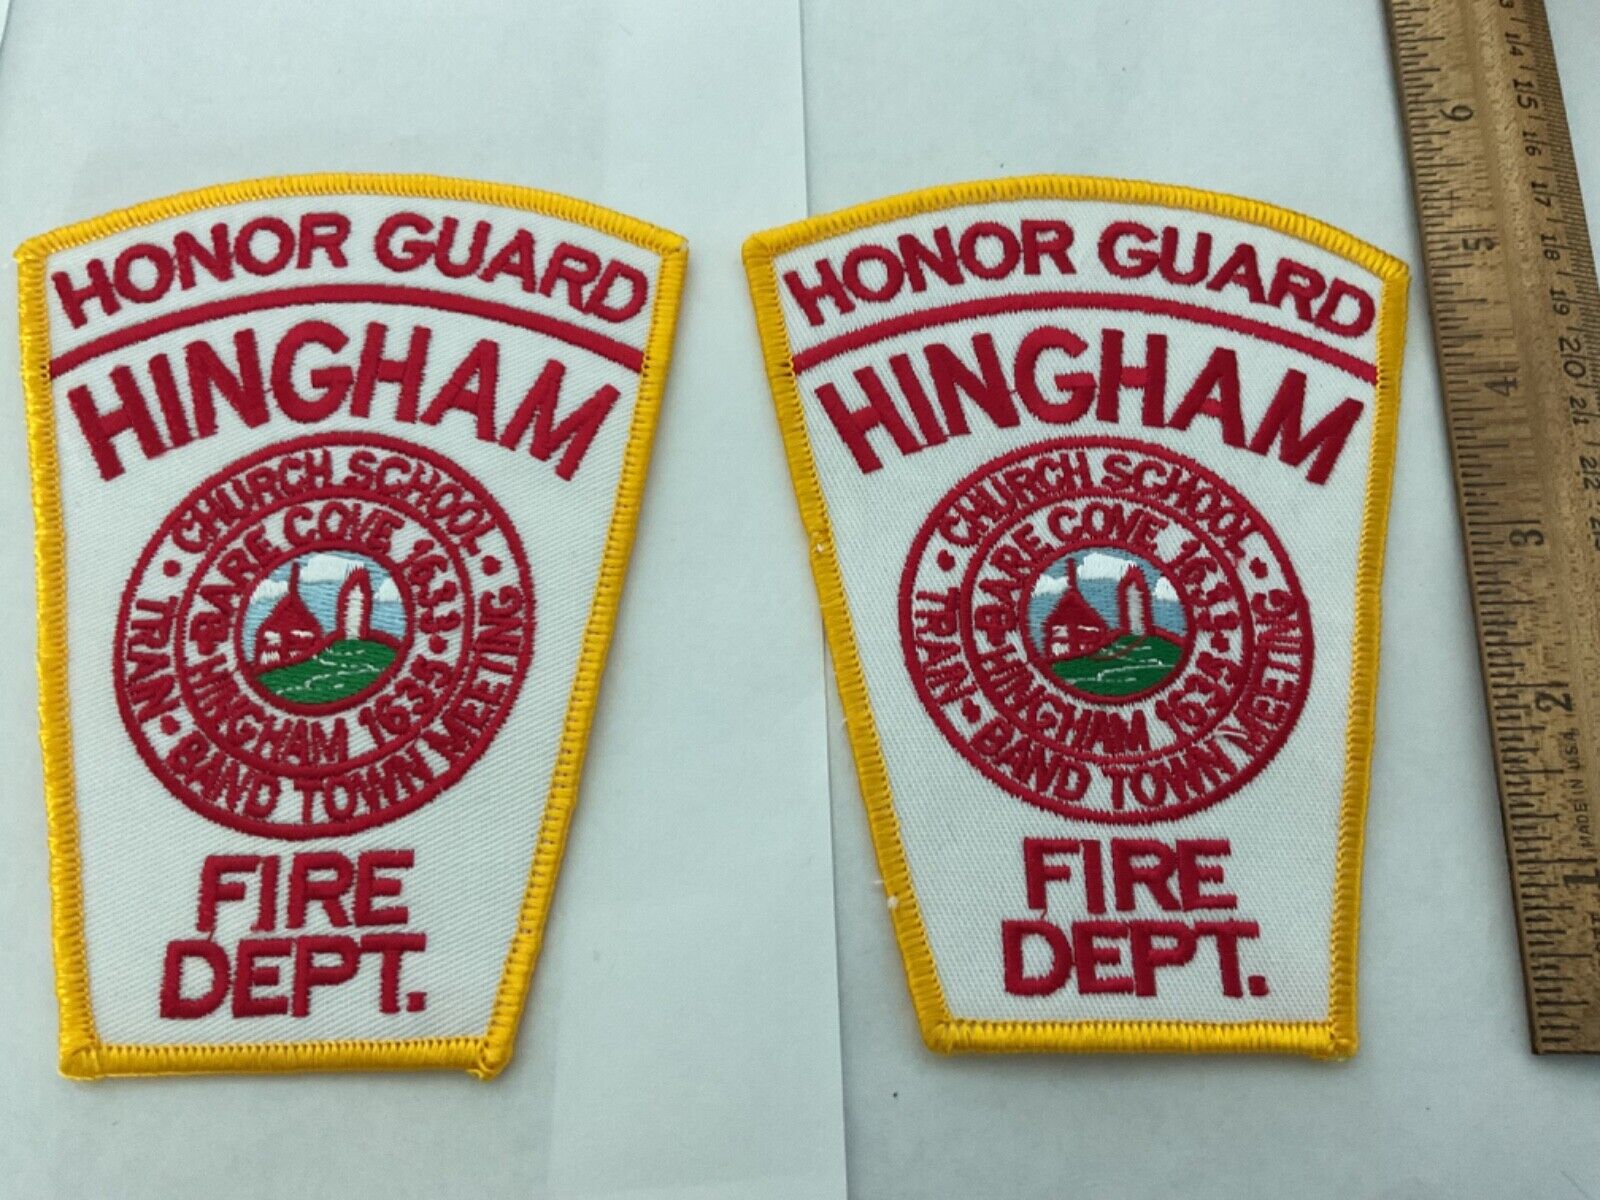 Hingham Honor Guard Fire  Dept. Massachusetts collectable patch set  2 total